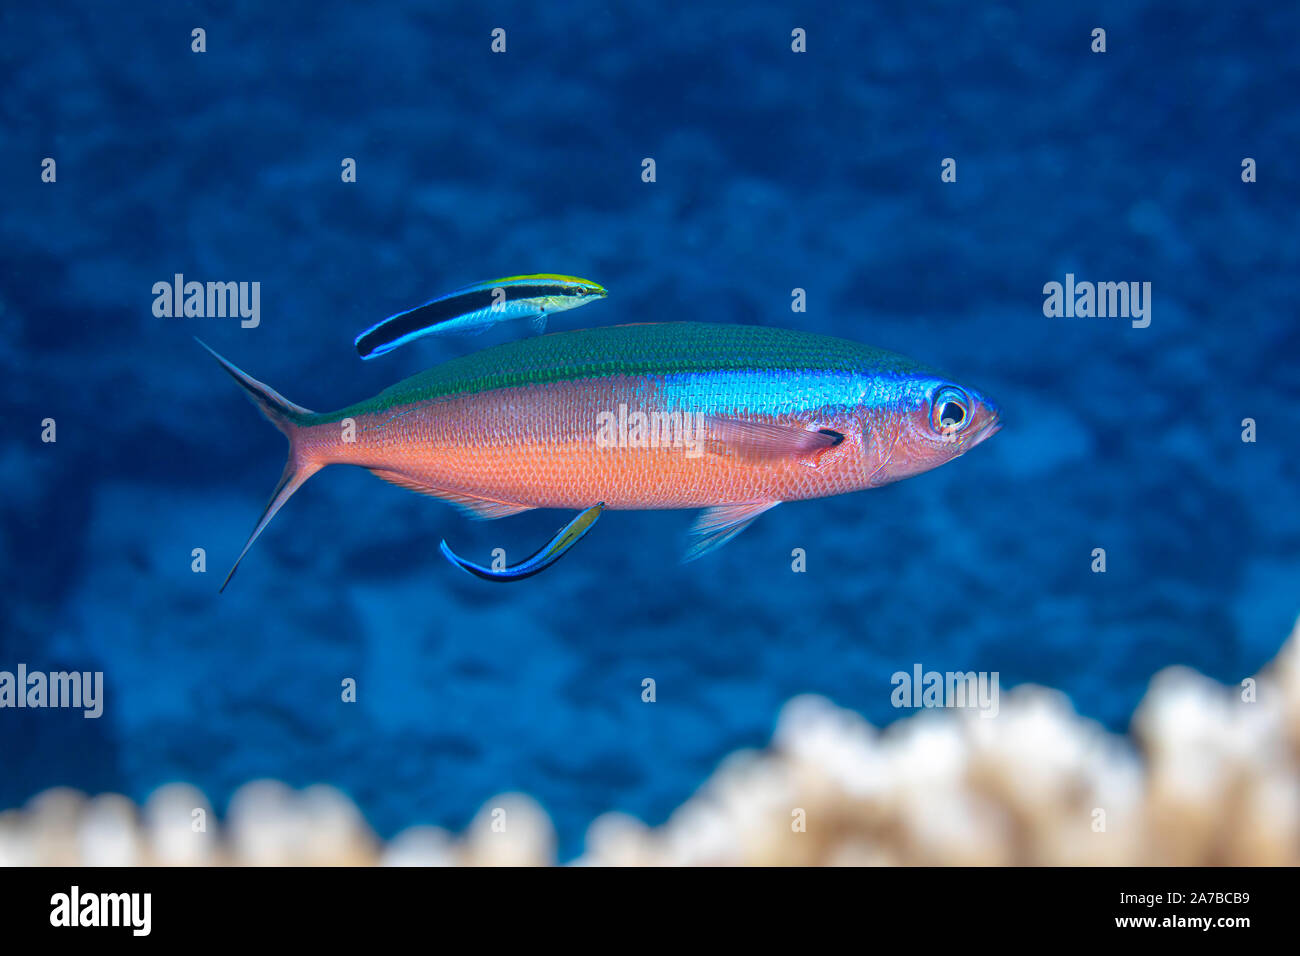 This neon fusilier, Pterocaesio tile, also known as a bluestreak fusilier, is getting inspected for parasites by two bluestreak cleaner wrasse, Labroi Stock Photo